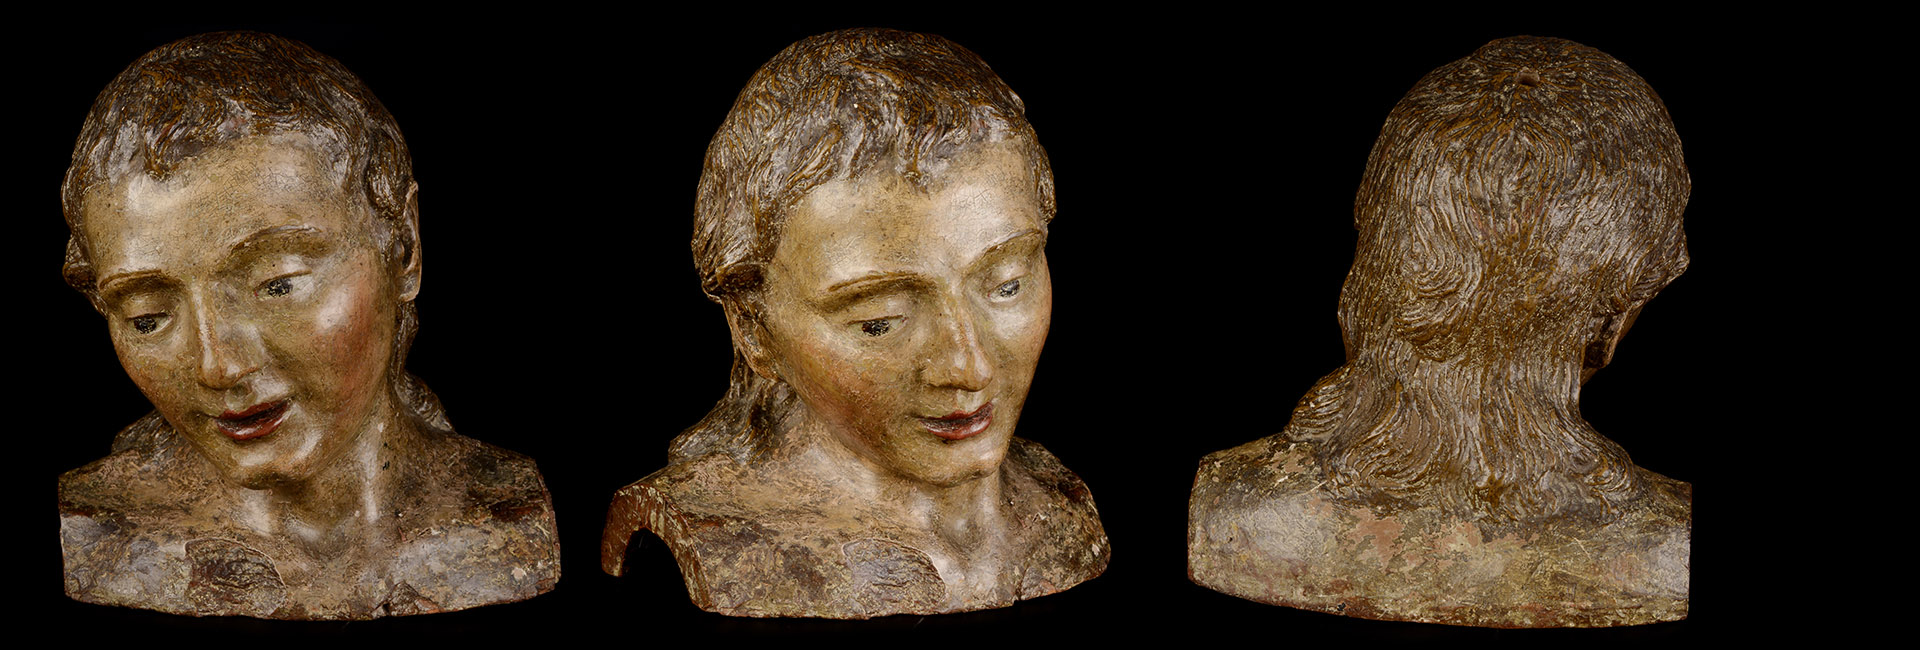 Italy, beginning of the 16th century [Renaissance bust of a young man]